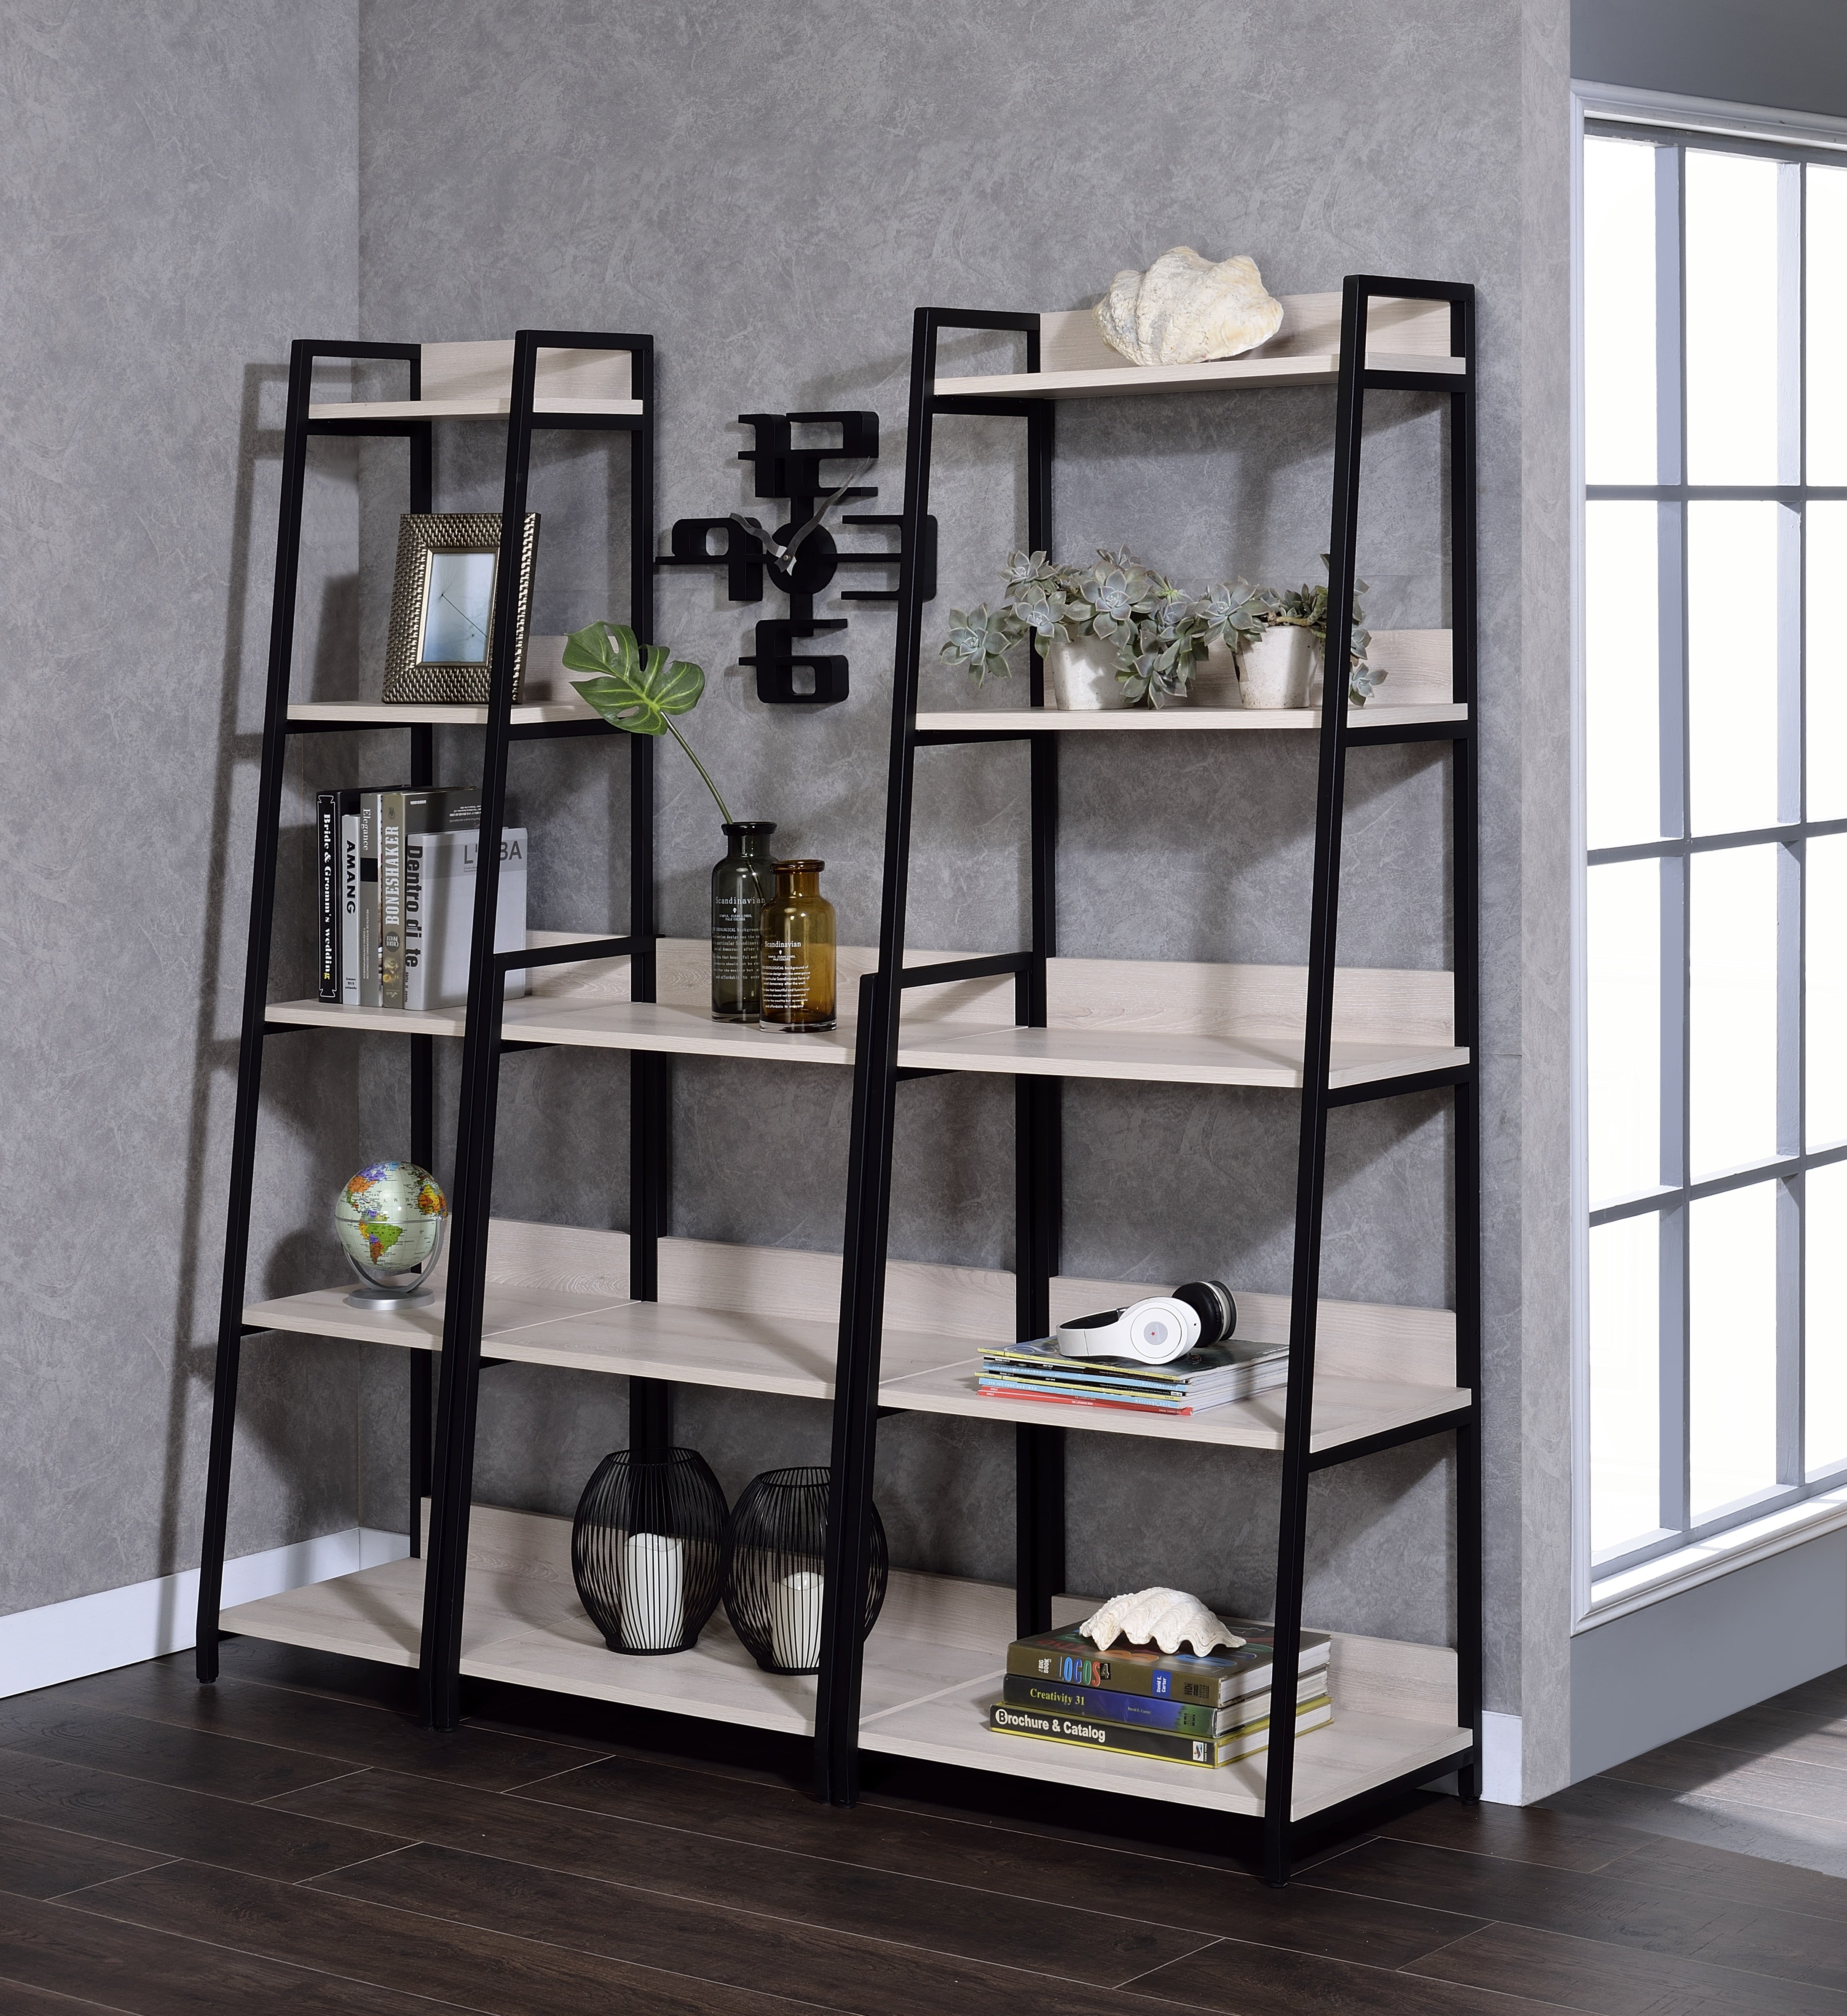 ACME Bookcases & Display Units - ACME Wendral Bookshelf (5-Tier, 16"L), Natural & Black